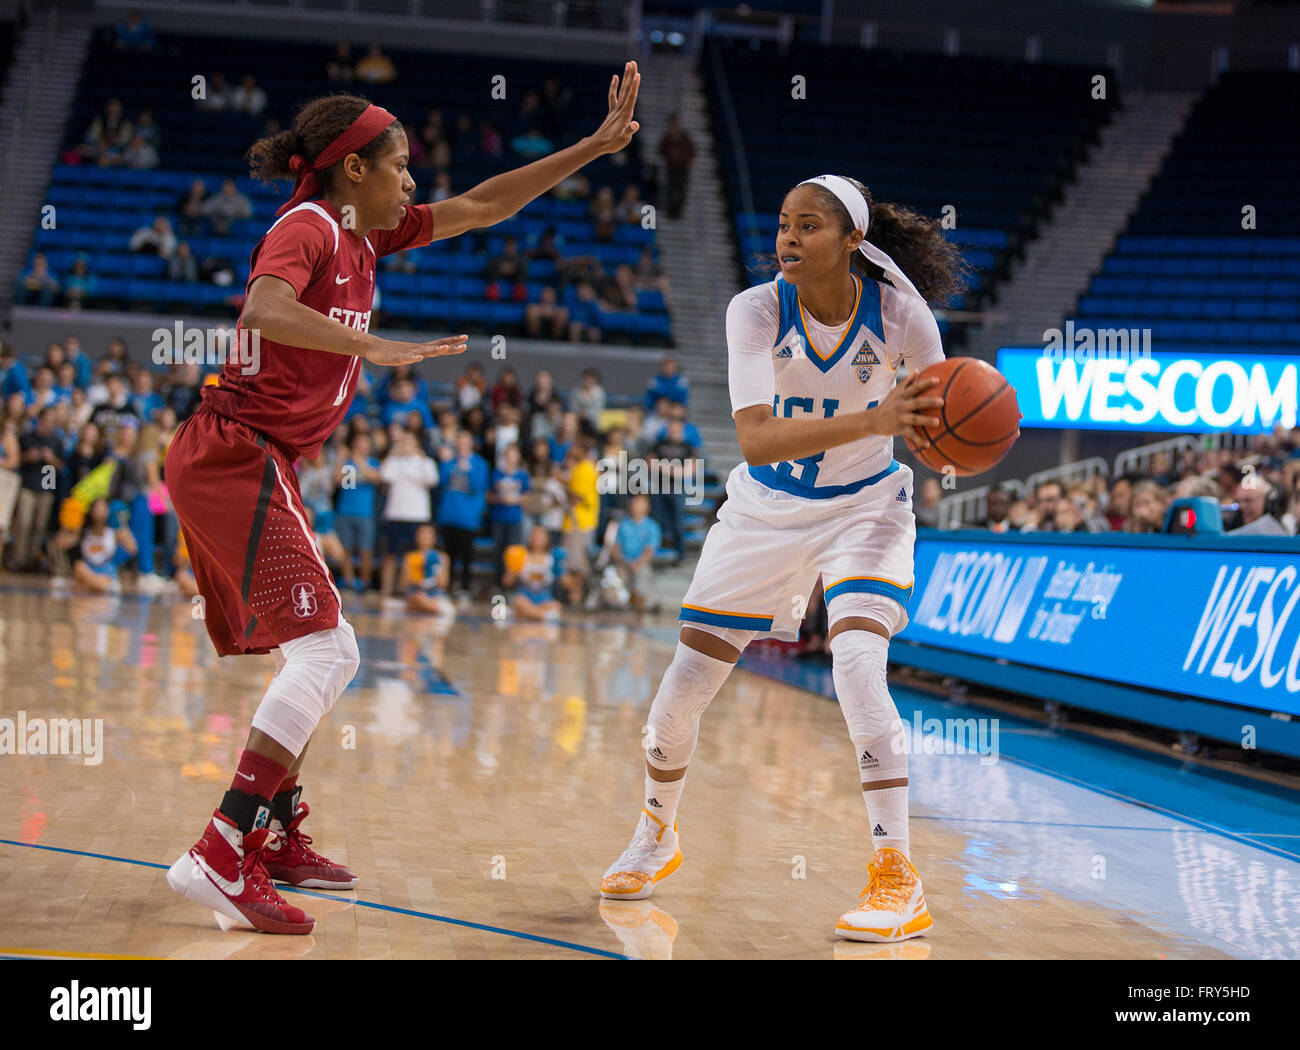 Westwood, CA. 21st Jan, 2016. UCLA Bruins guard (3) Jordin Canada looks to drive to the basket against a Stanford defender during a Pac-12 game between the Stanford Cardinal and the UCLA Bruins at Pauley Pavilion in Westwood, California. UCLA defeated Stanford 56-36.(Mandatory Credit: Juan Lainez/MarinMedia/Cal Sport Media) © csm/Alamy Live News Stock Photo